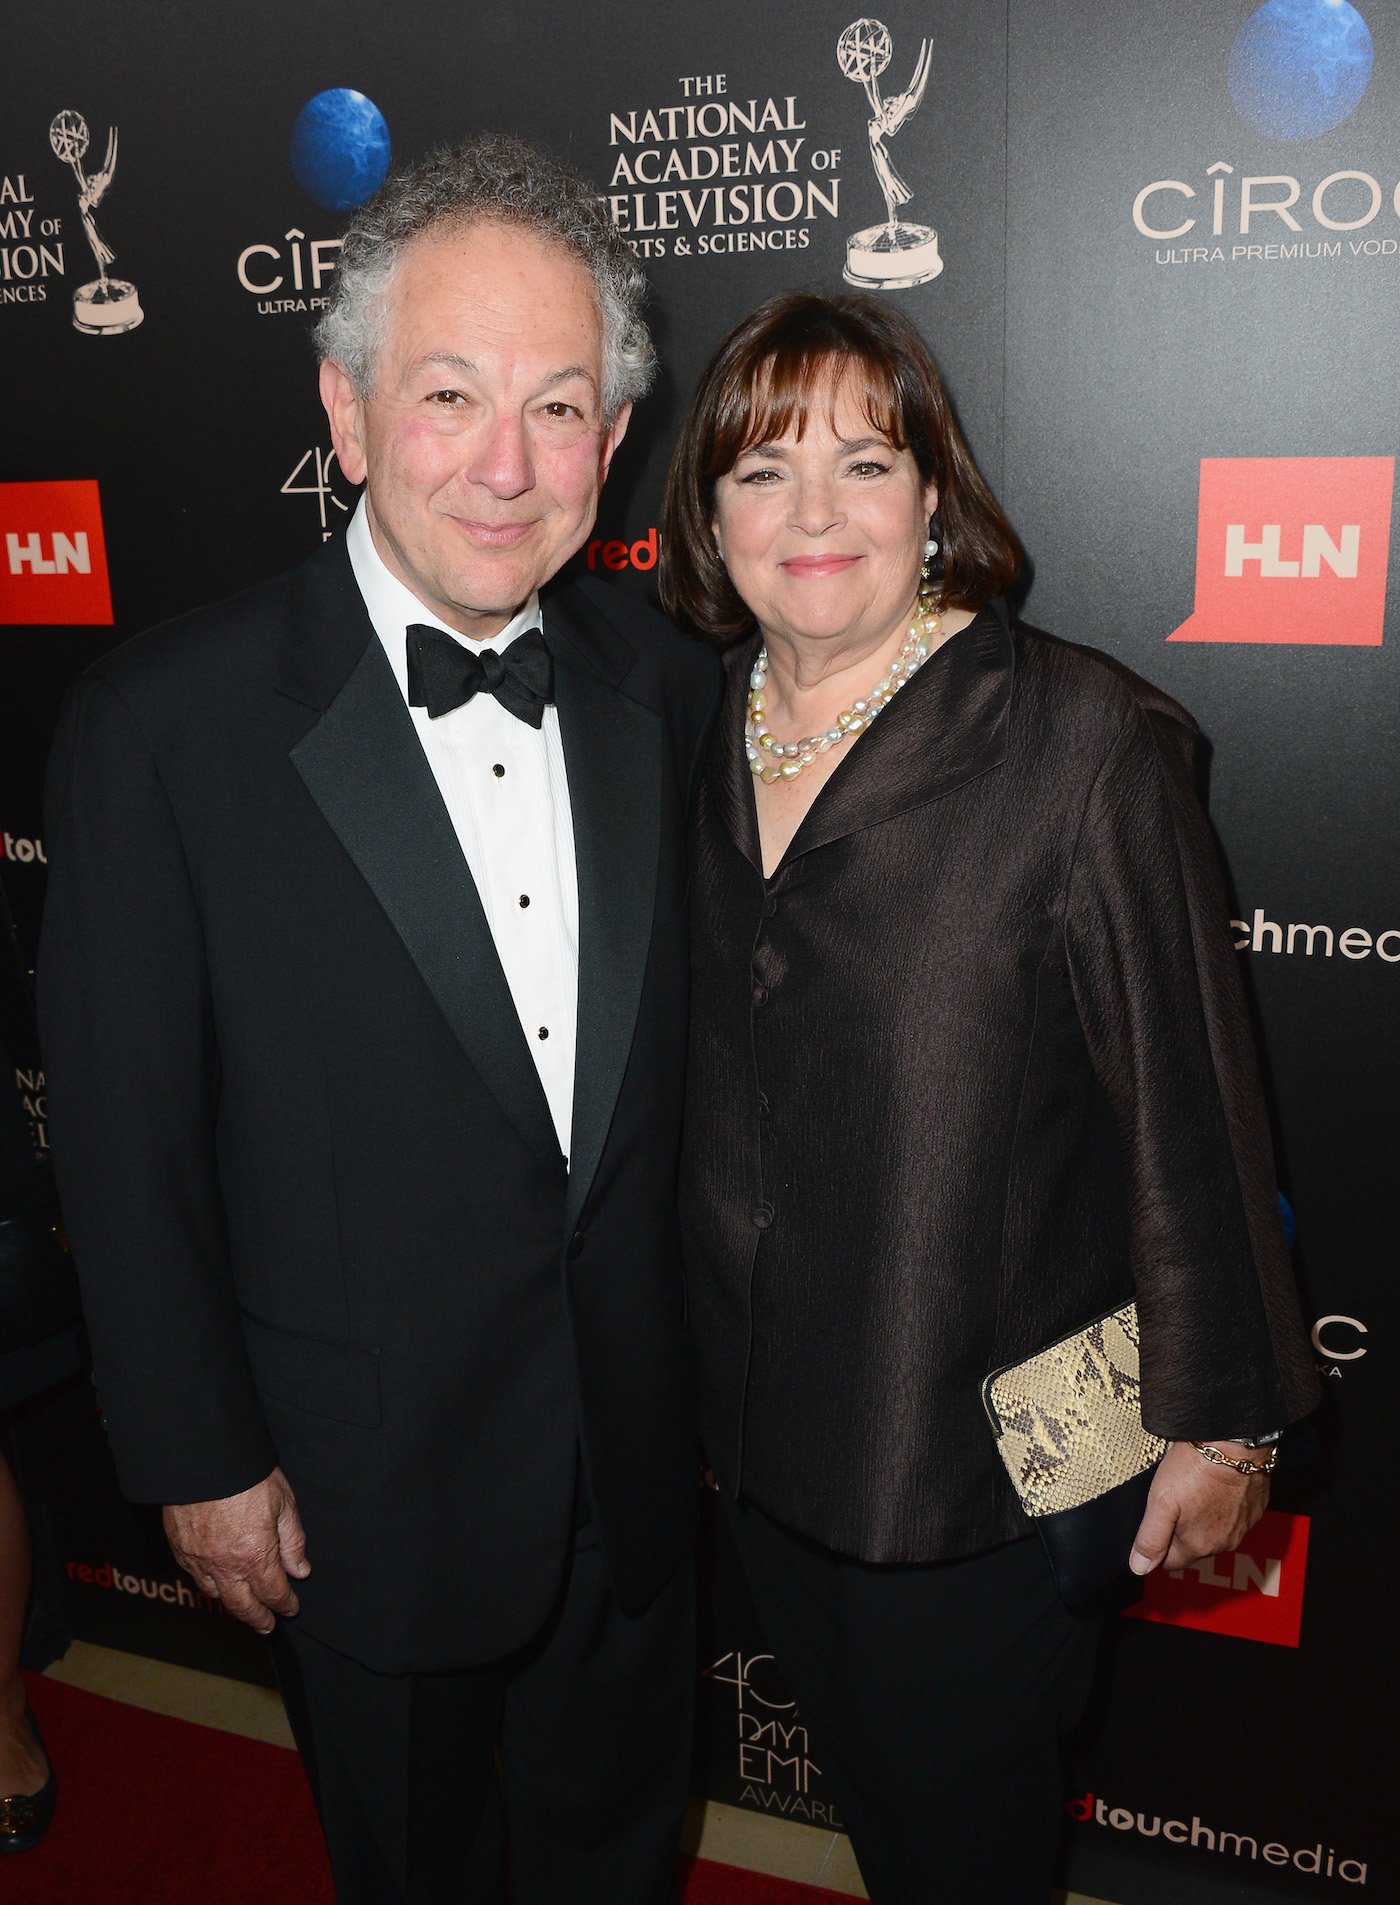 Jeffrey Garten and Ina Garten smile as they pose together at the 2013 Daytime Emmy Awards